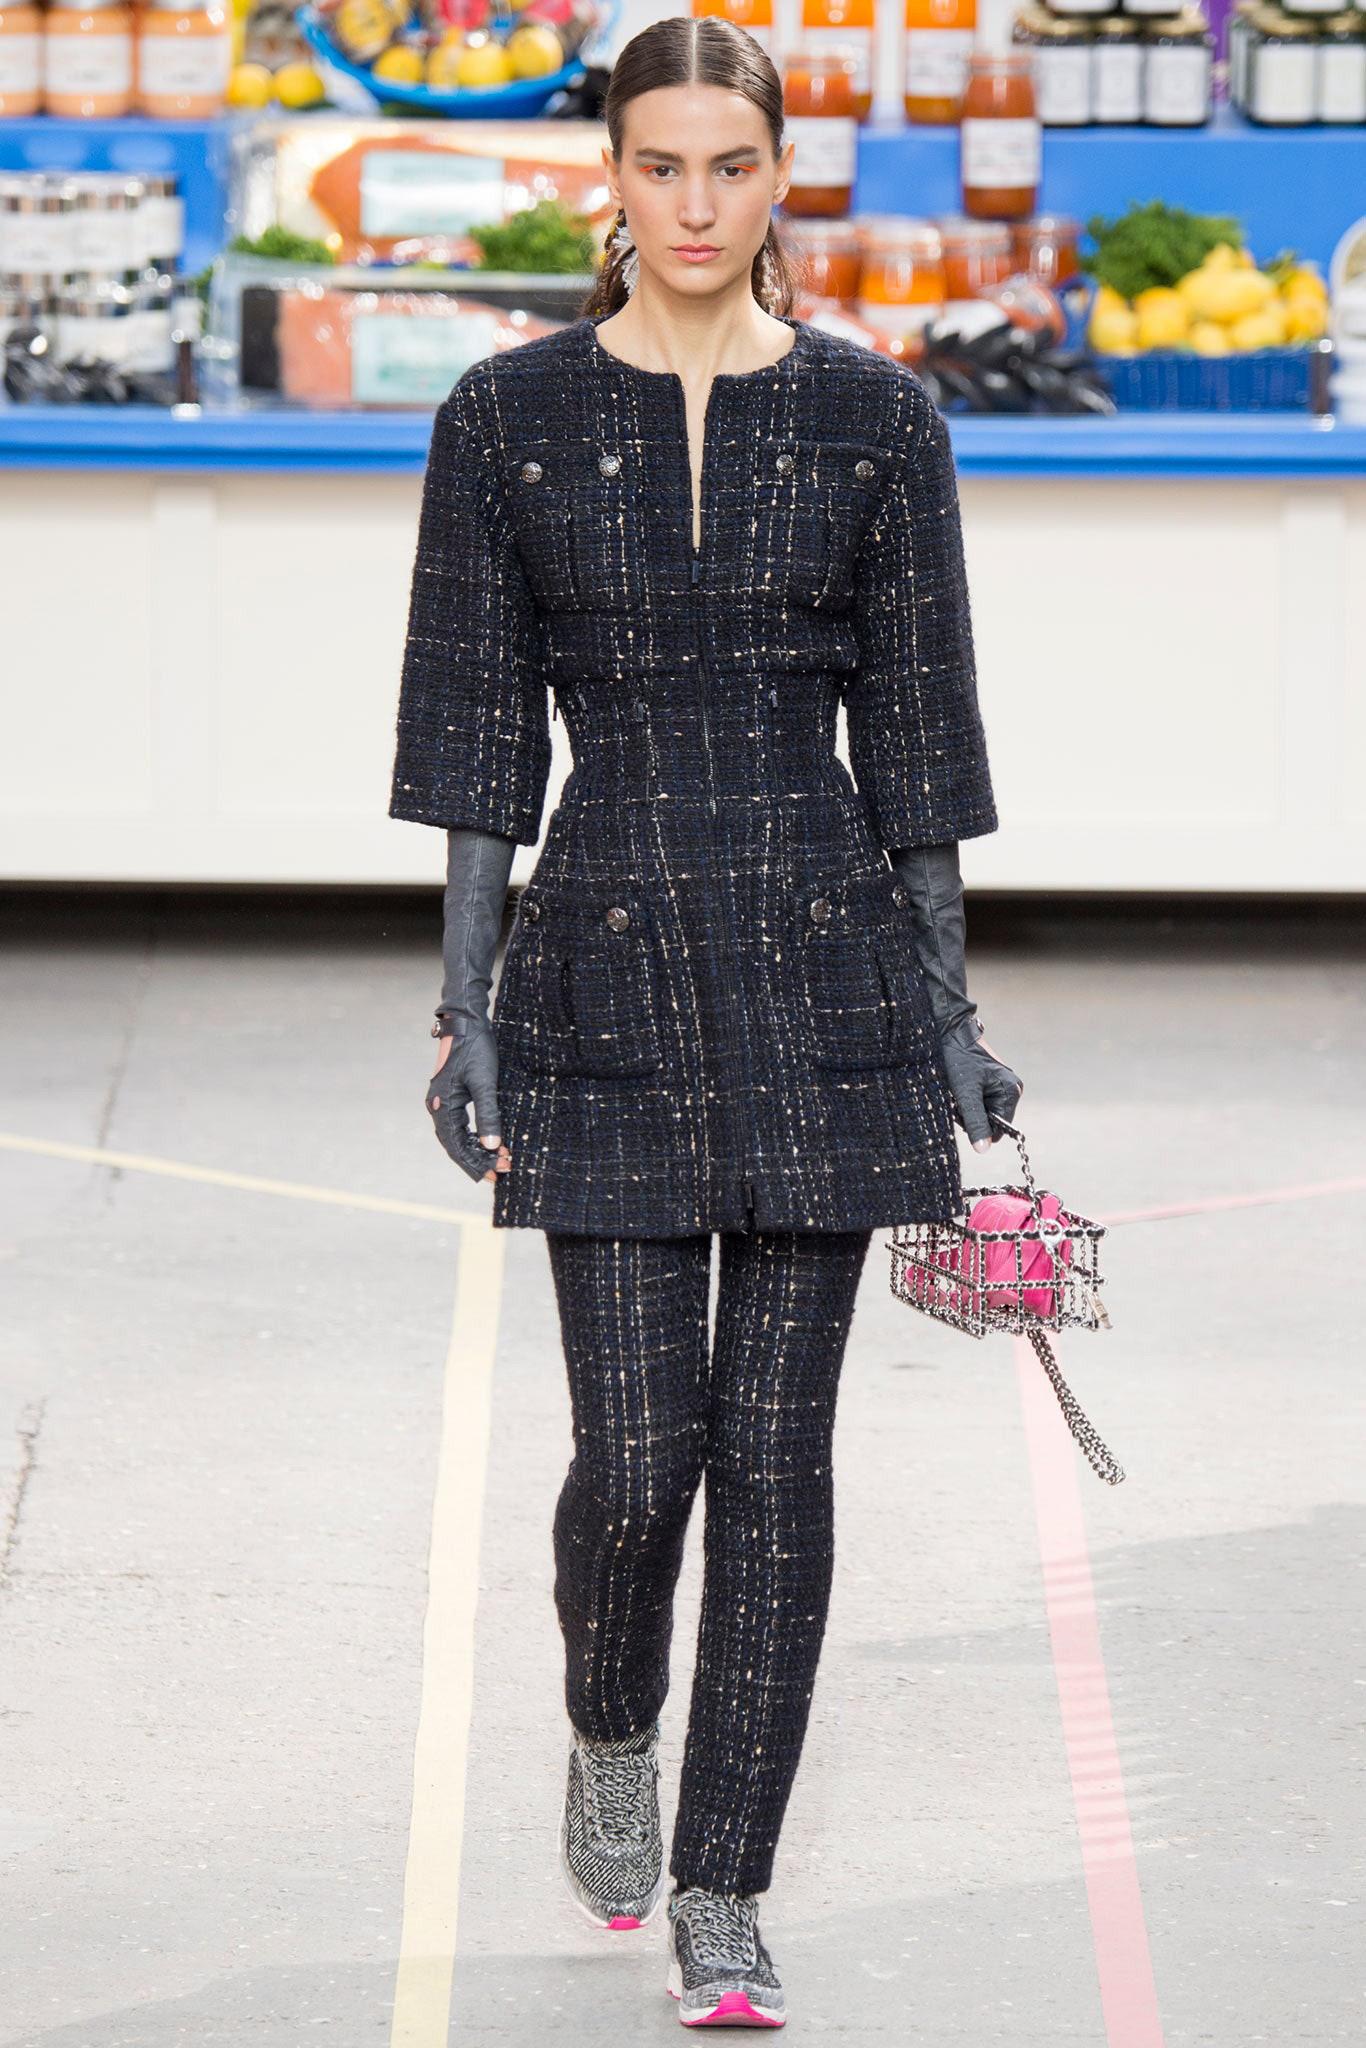 Runway Chanel black tweed jacket with accented waist from AD Campaign of SUPERMARKET Collection
- boutique Morice over 9,000$
Size mark 36 FR. Condition: never worn.
- as seen on Cara Delevingne in Advert !
- CC logo buttons 
- iconic 4-flap-pocket